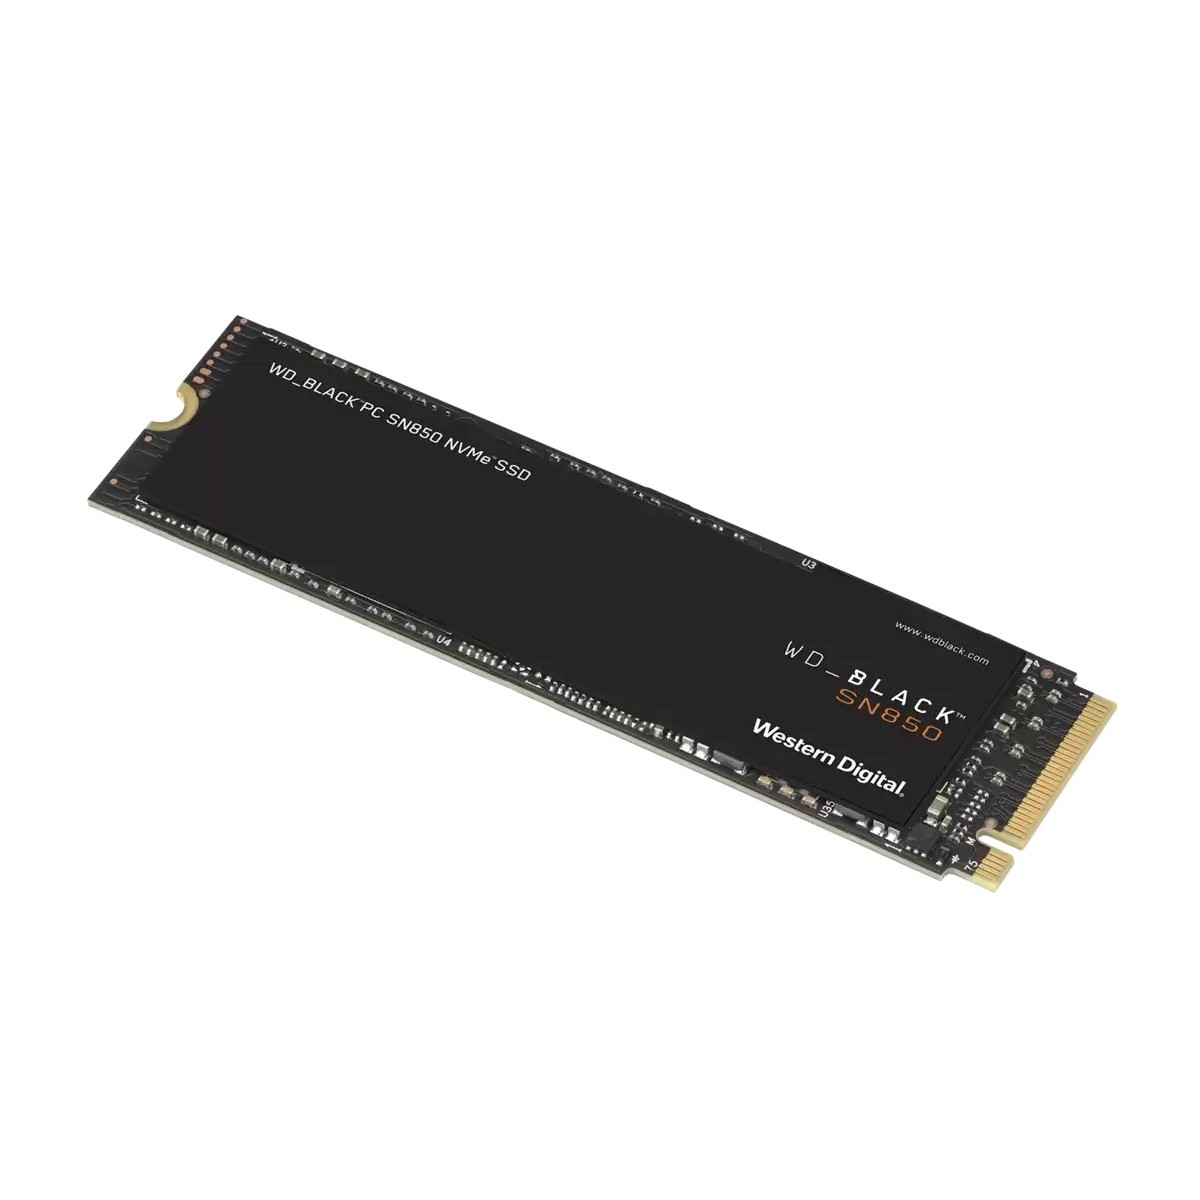 WD Black SN850 NVMe SSD WDBAPY0020BN - Solid State Disk - NVMe